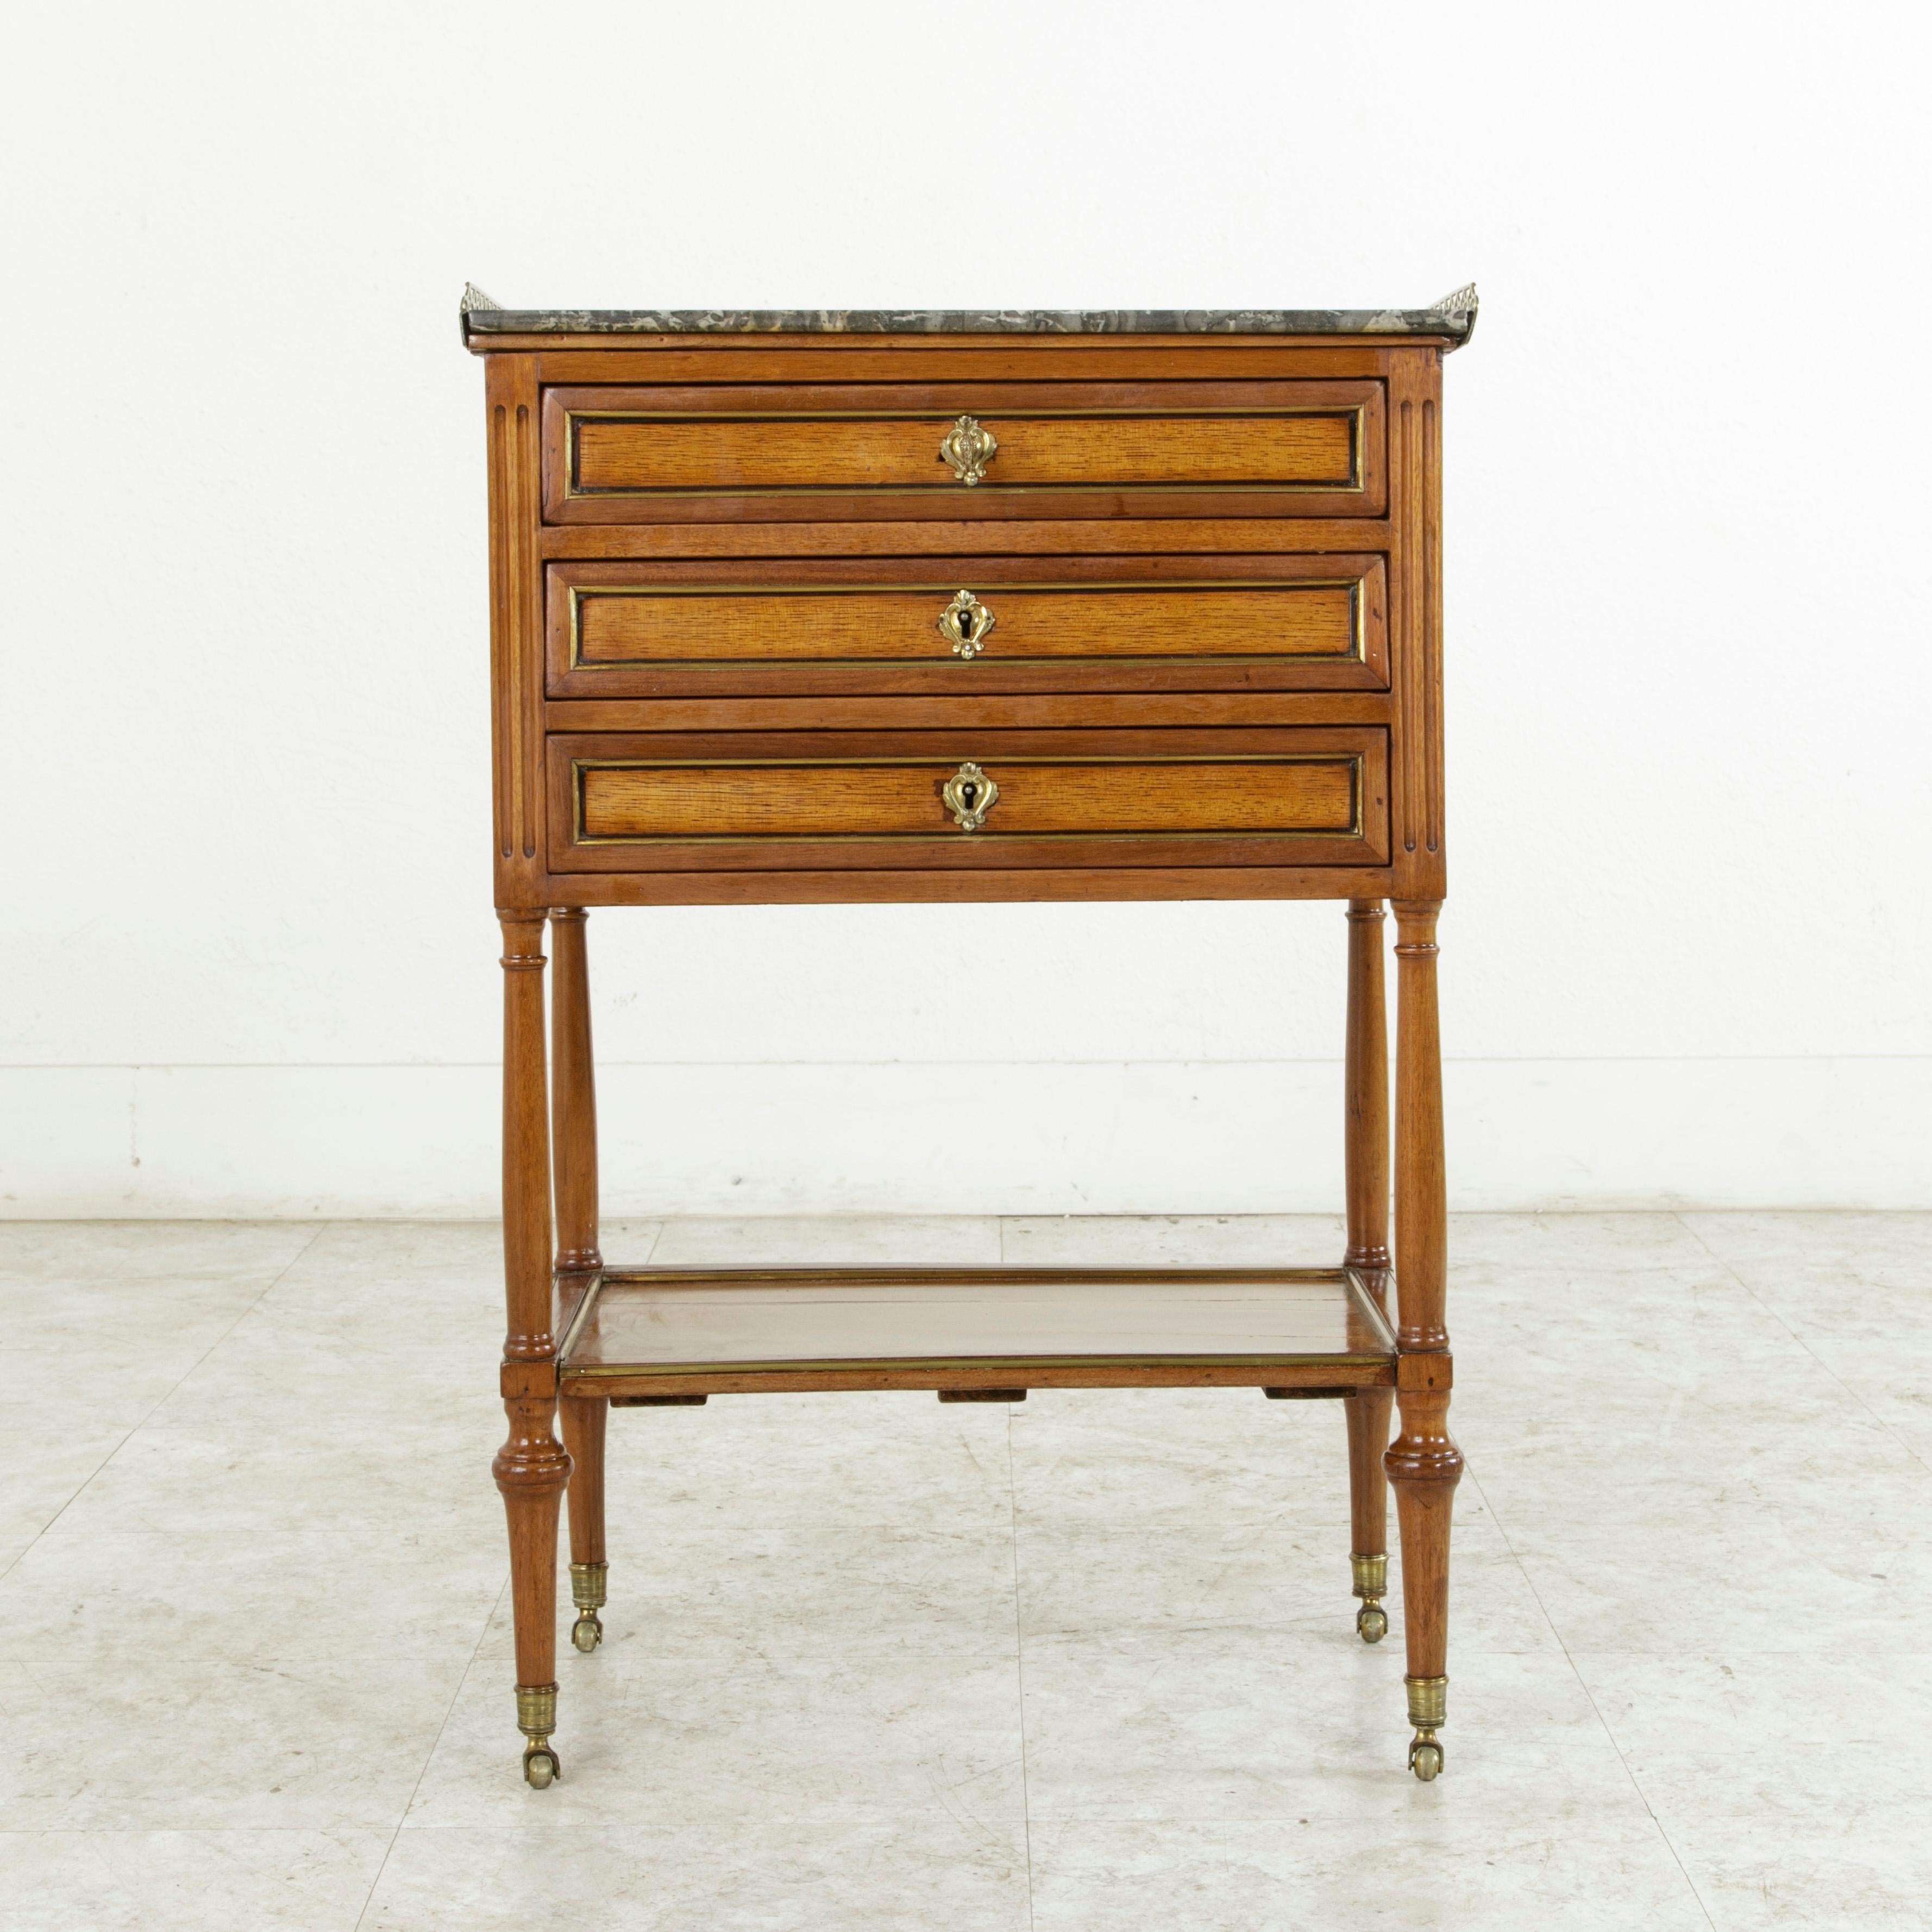 This unique late 18th century French Louis XVI period walnut side table or nightstand features fluted corners and inset bronze banding around its rosewood facades. A pieced bronze gallery surrounds its Saint Anne marble top on three sides. Its three